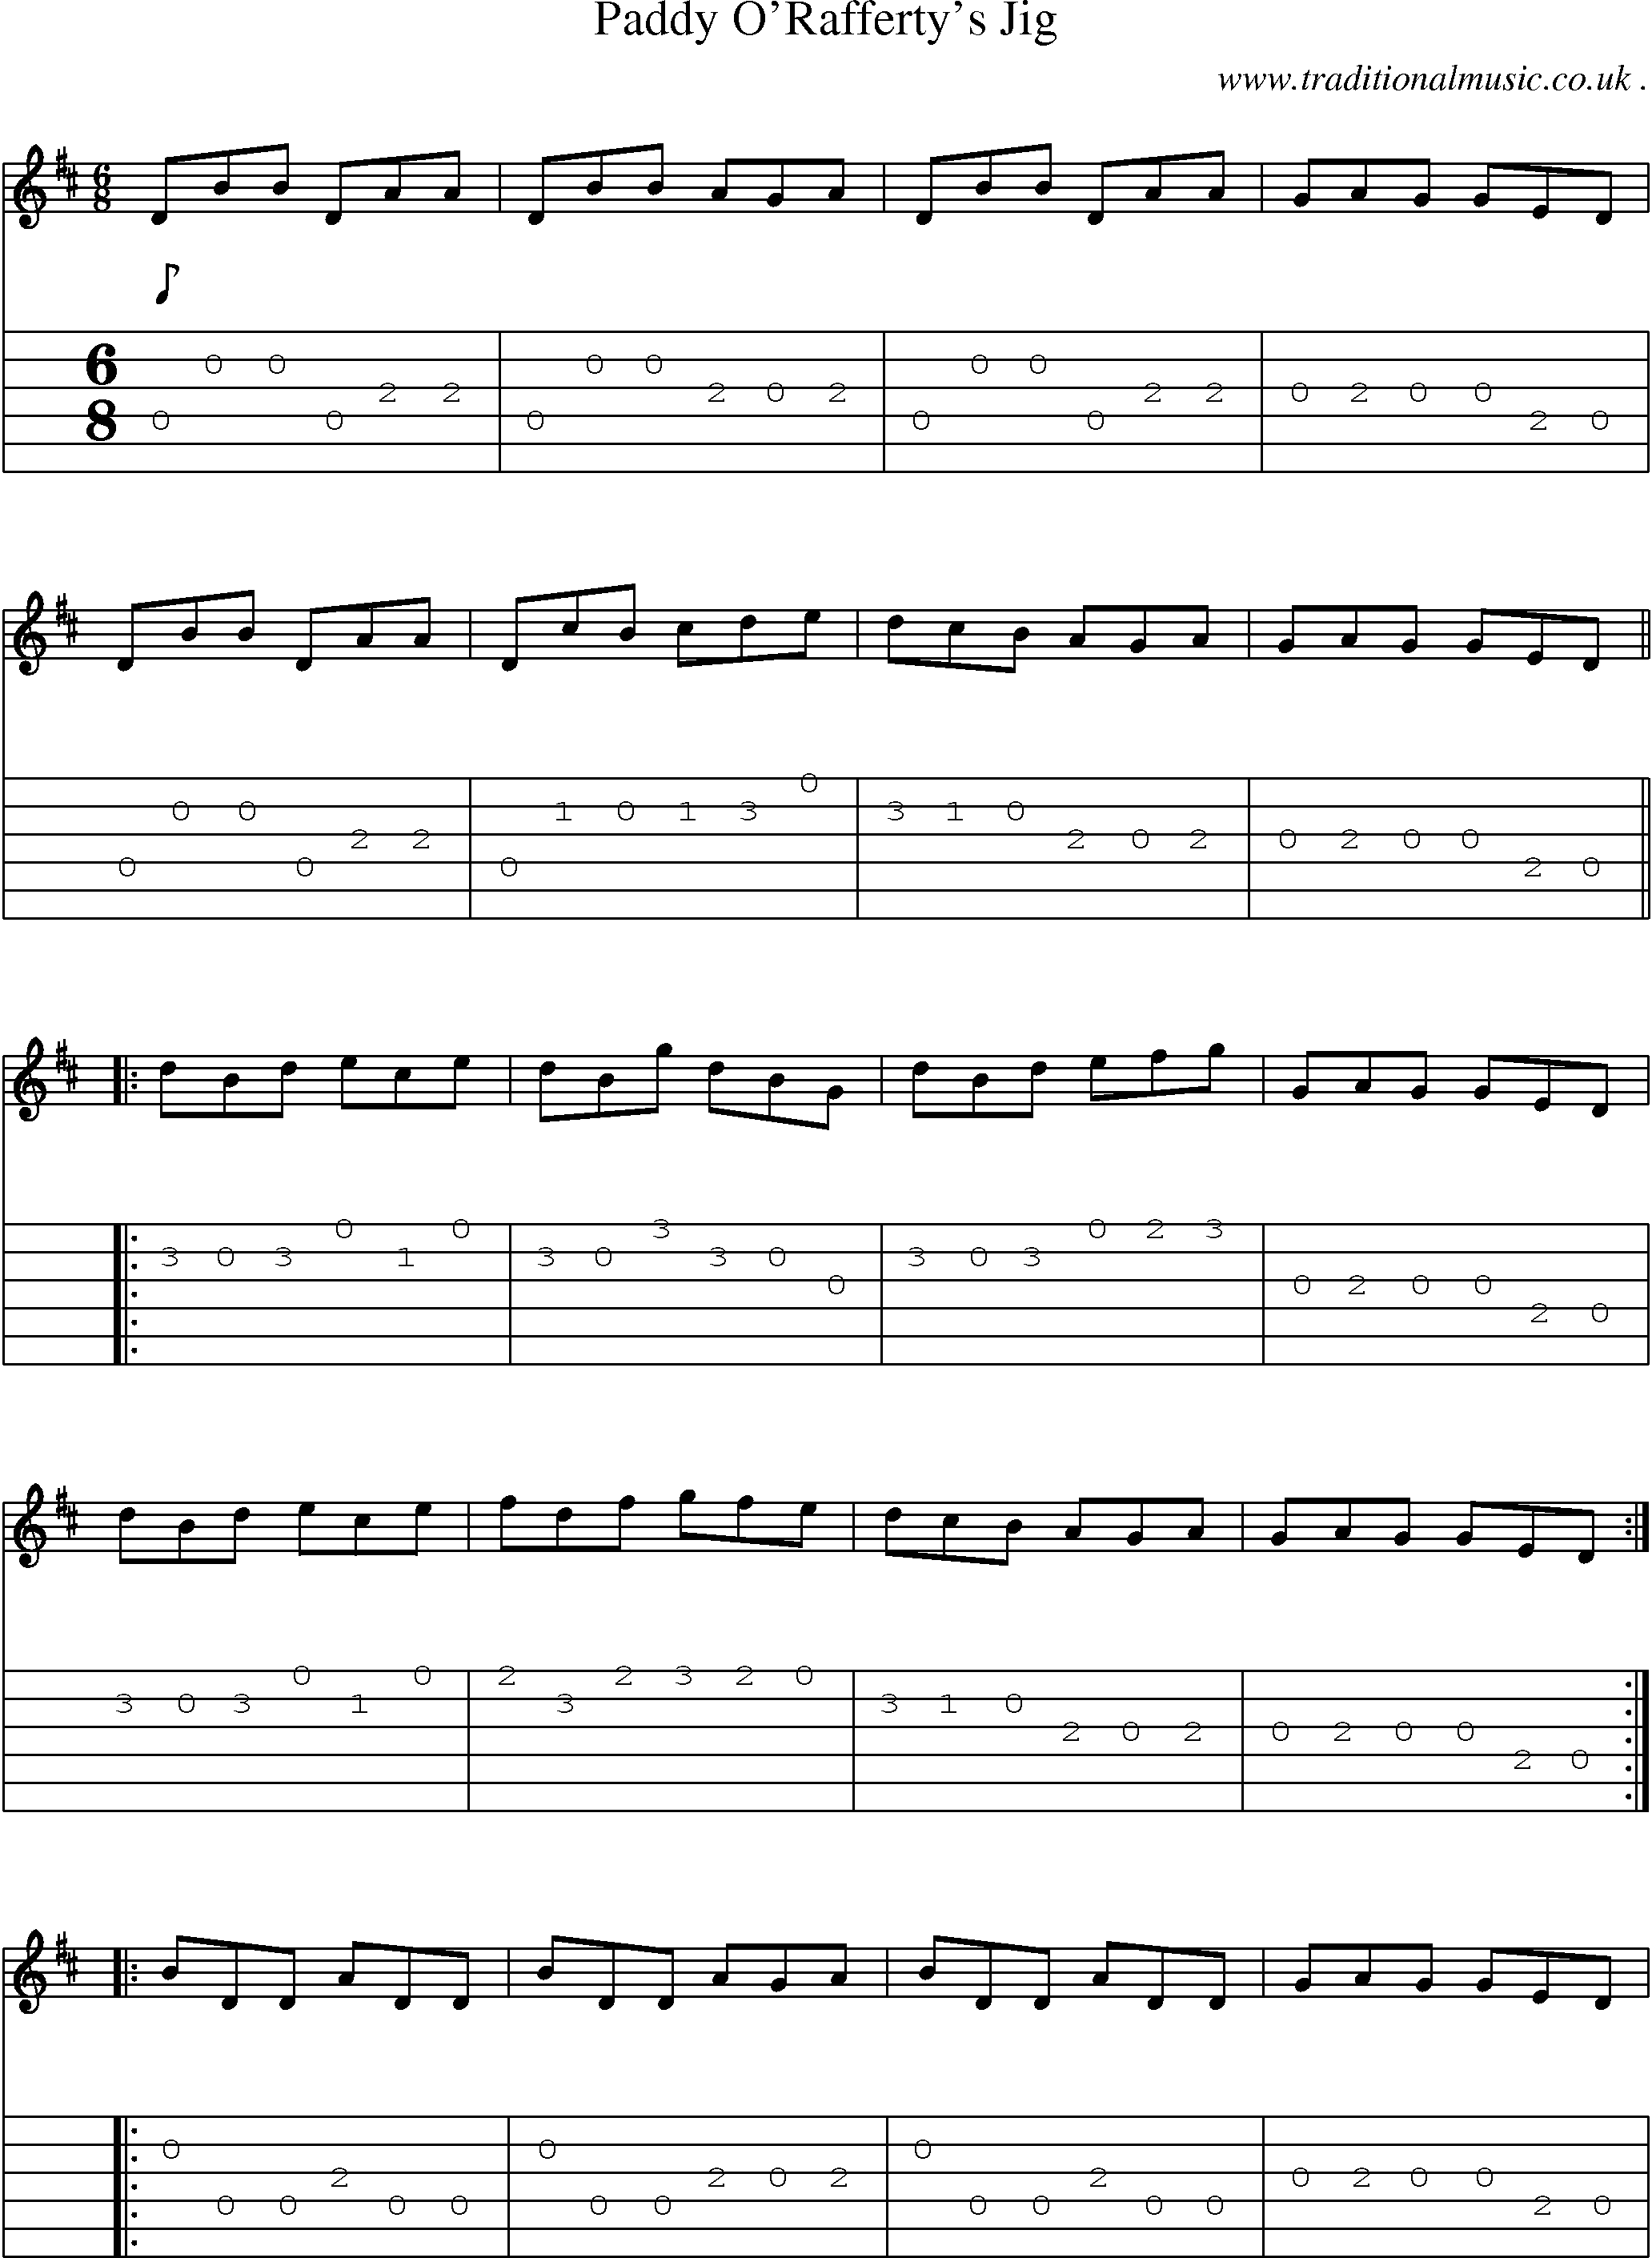 Sheet-Music and Guitar Tabs for Paddy Oraffertys Jig